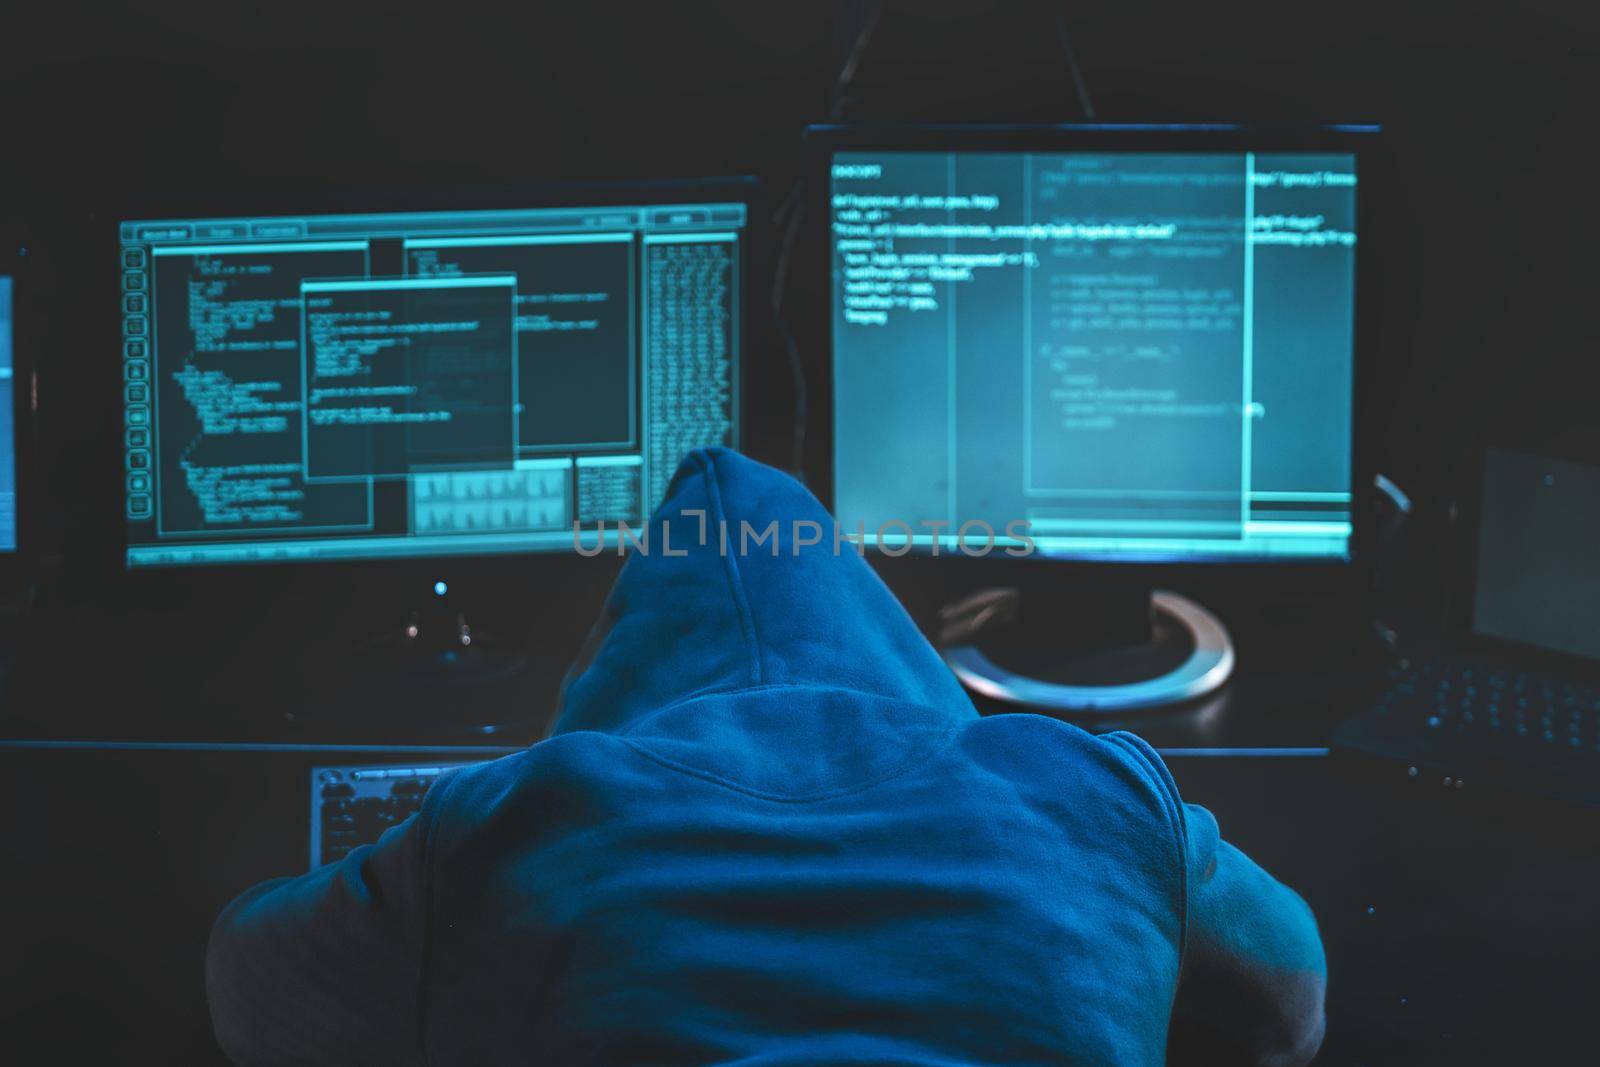 Overworked tired hacker. hooded hacker sleeping at his computer, malicious code software on the screen hacking data center. Download image by igor010